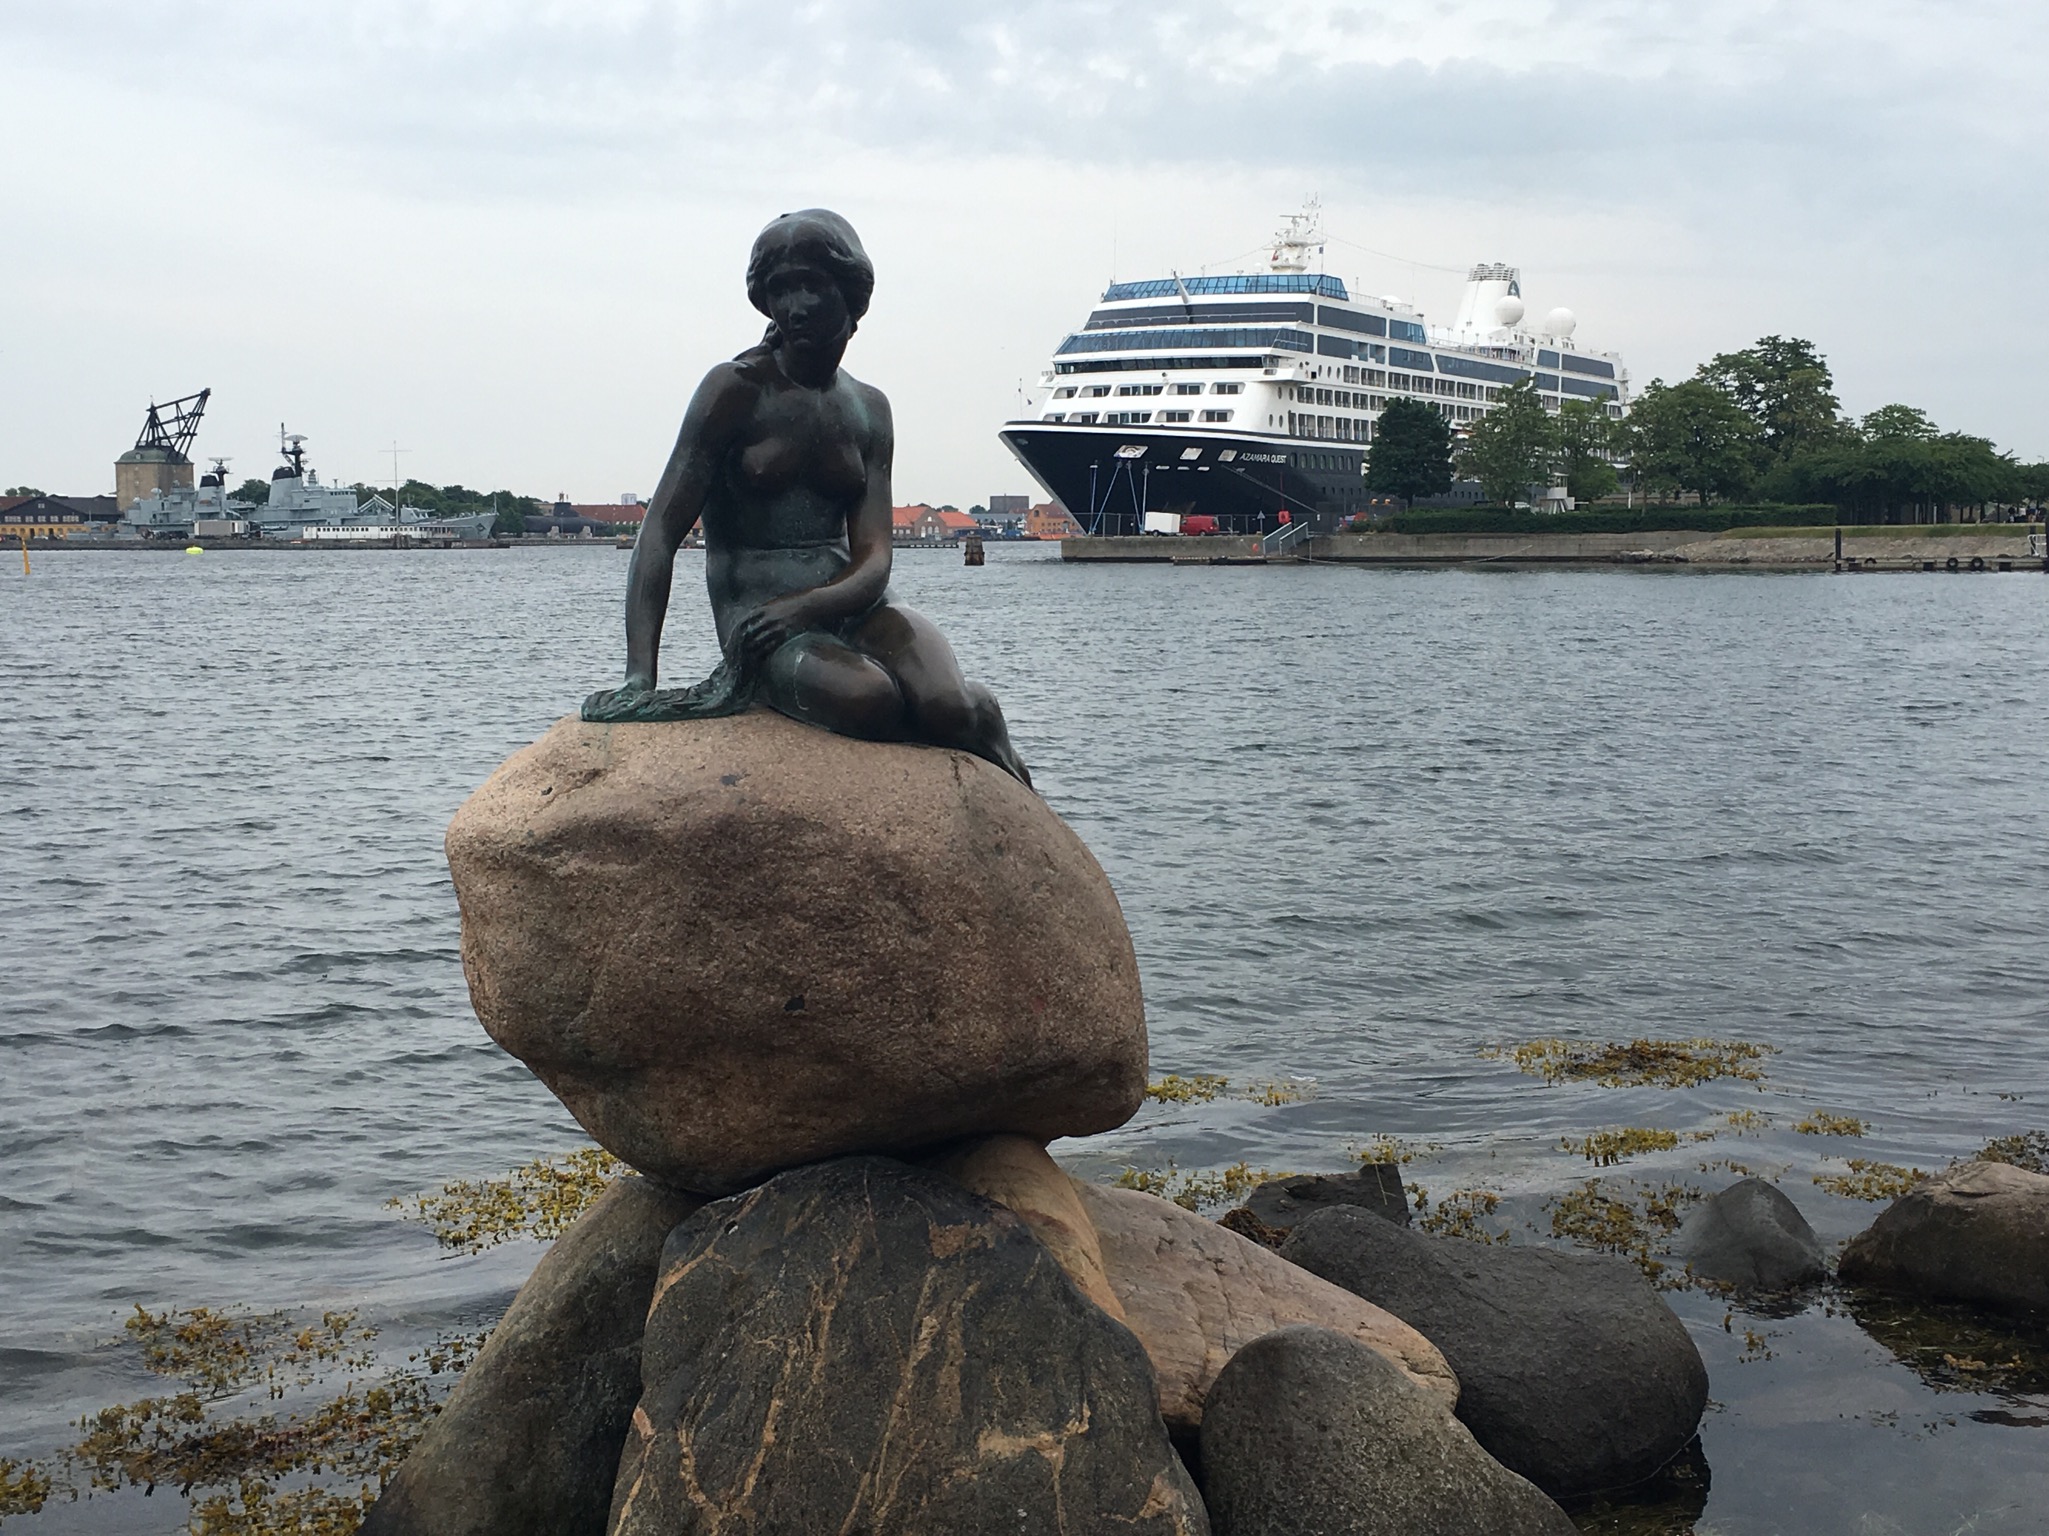 2016 Baltic Sea PerryGolf Cruise - Copenhagen - Another iconic location shot for Azamara Quest...this time with Copenhagen's famous little mermaid - PerryGolf.com